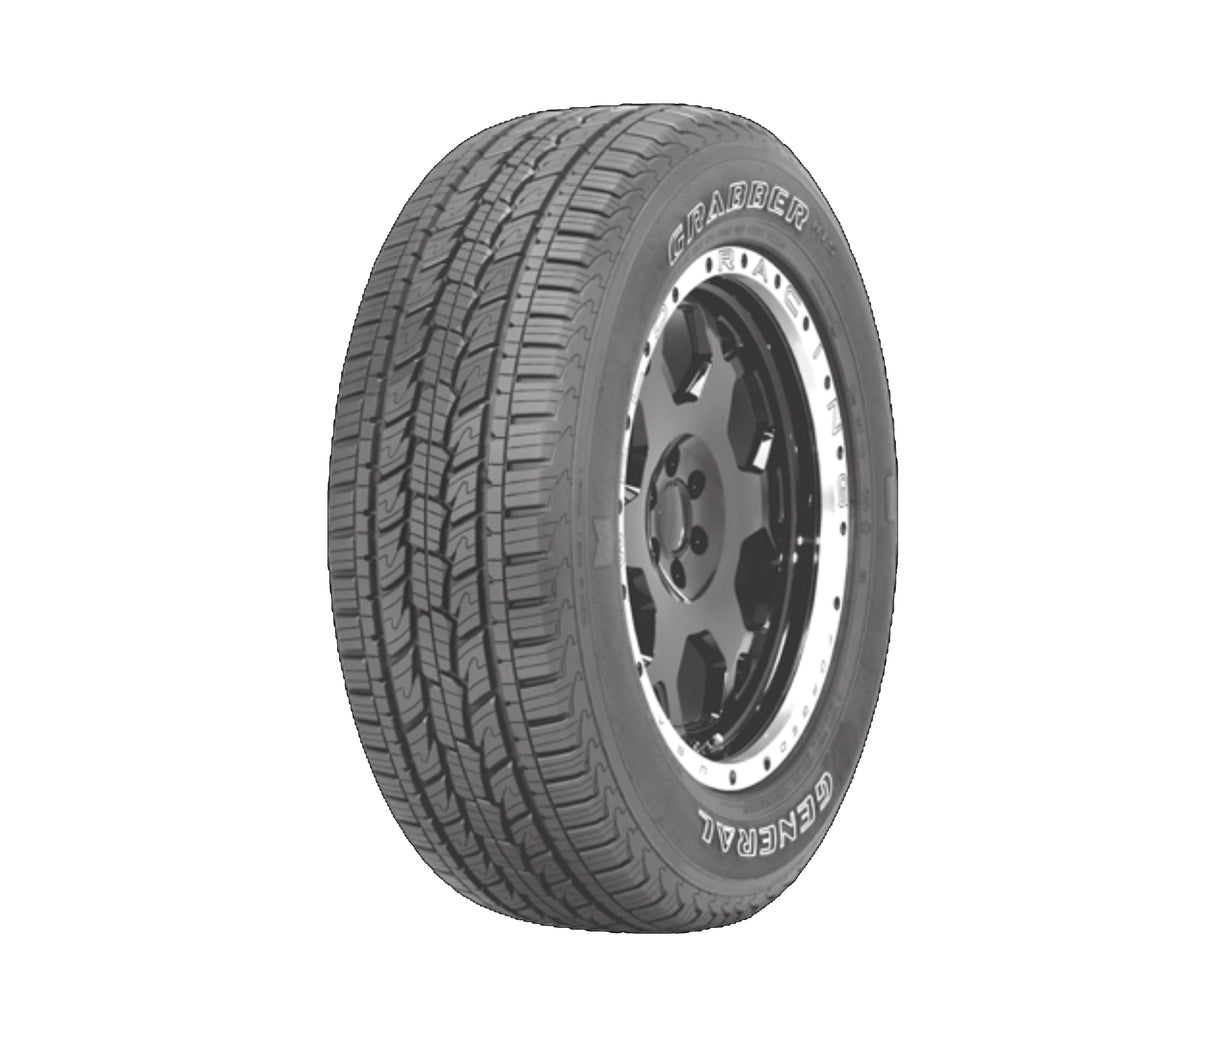 Neumático 255/70R16/HTS/111S Grabber General Tire